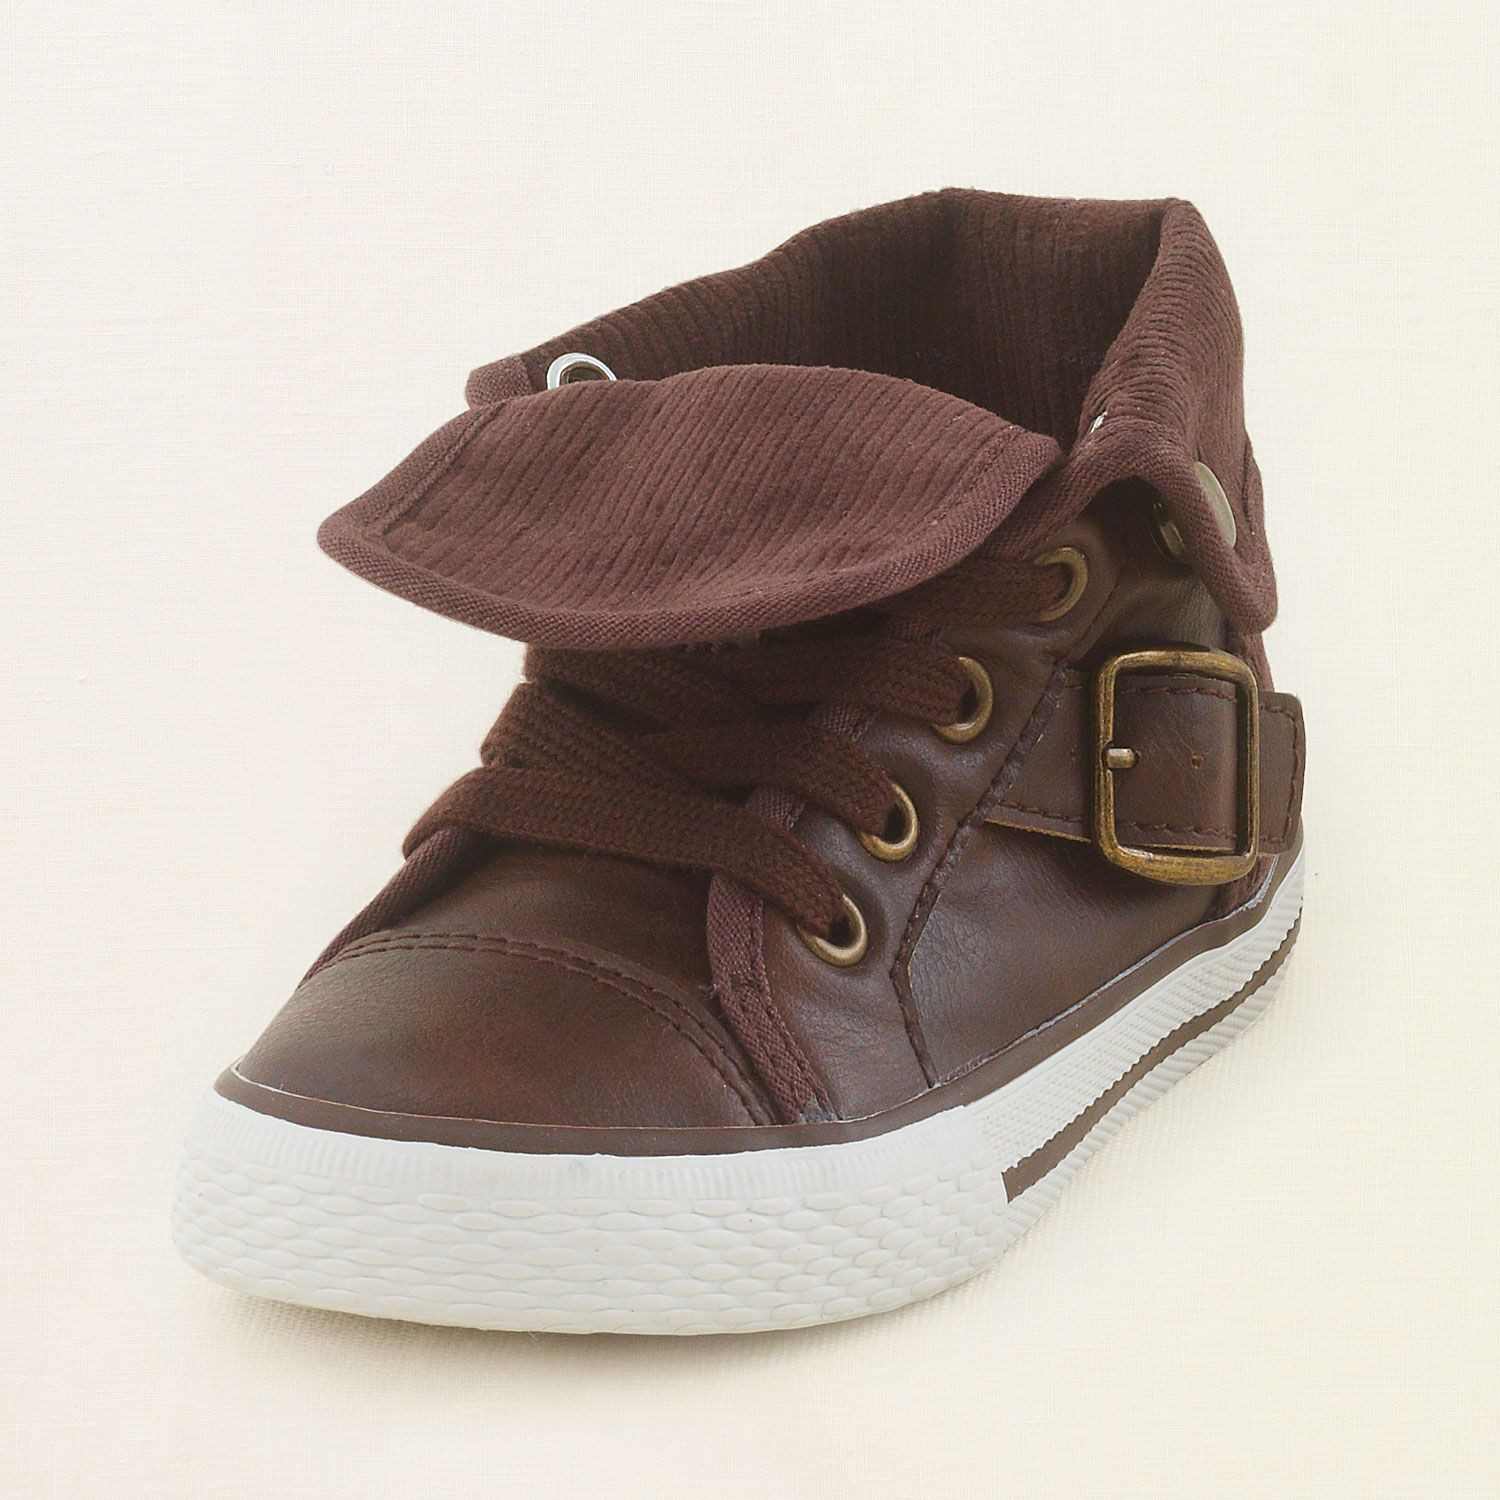 Baby Fashion Shoes
 baby boy shoes hipster sneaker